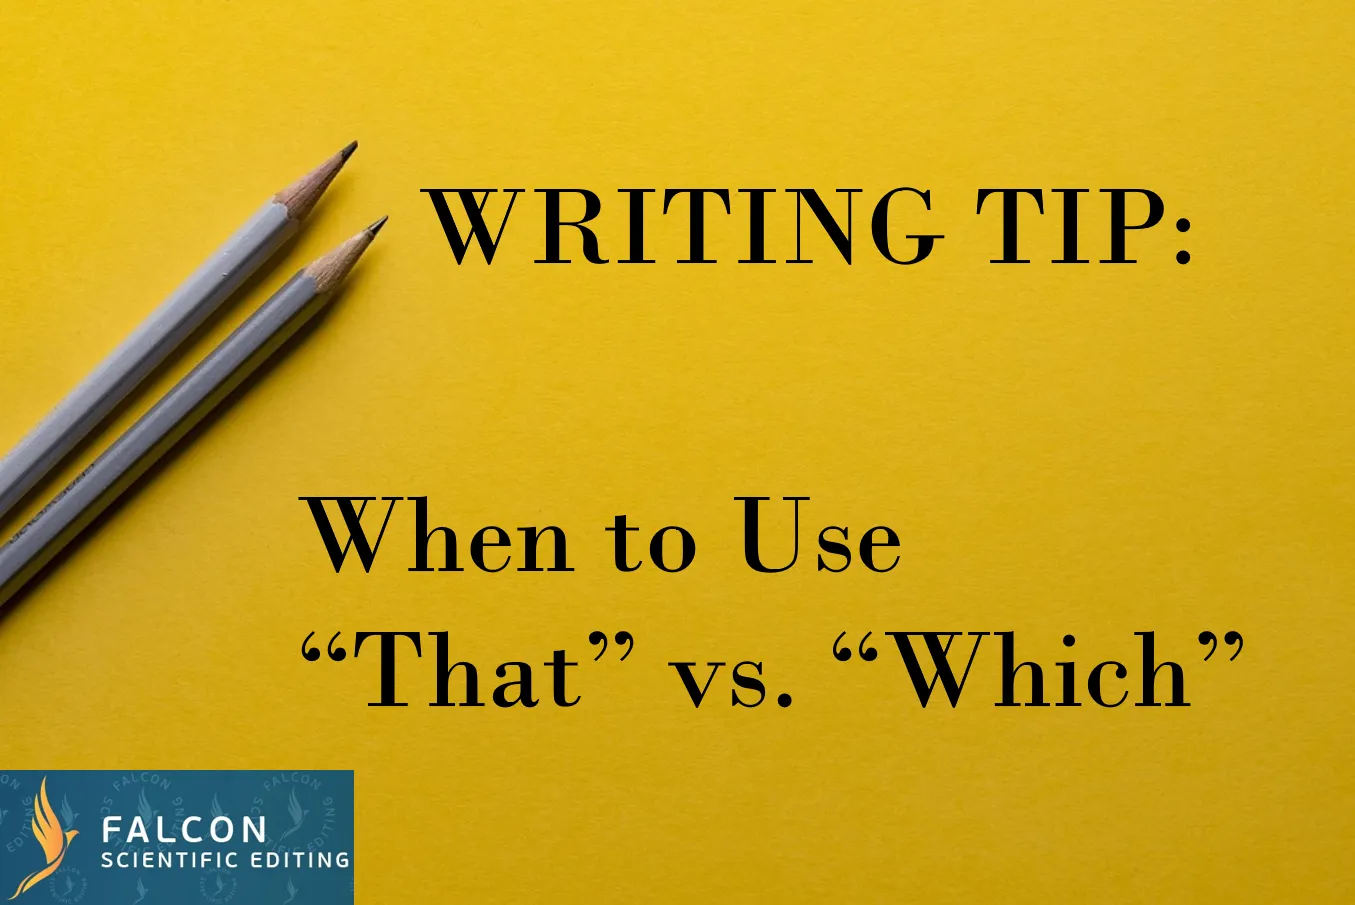 Writing Tip: When to Use “That” vs. “Which”